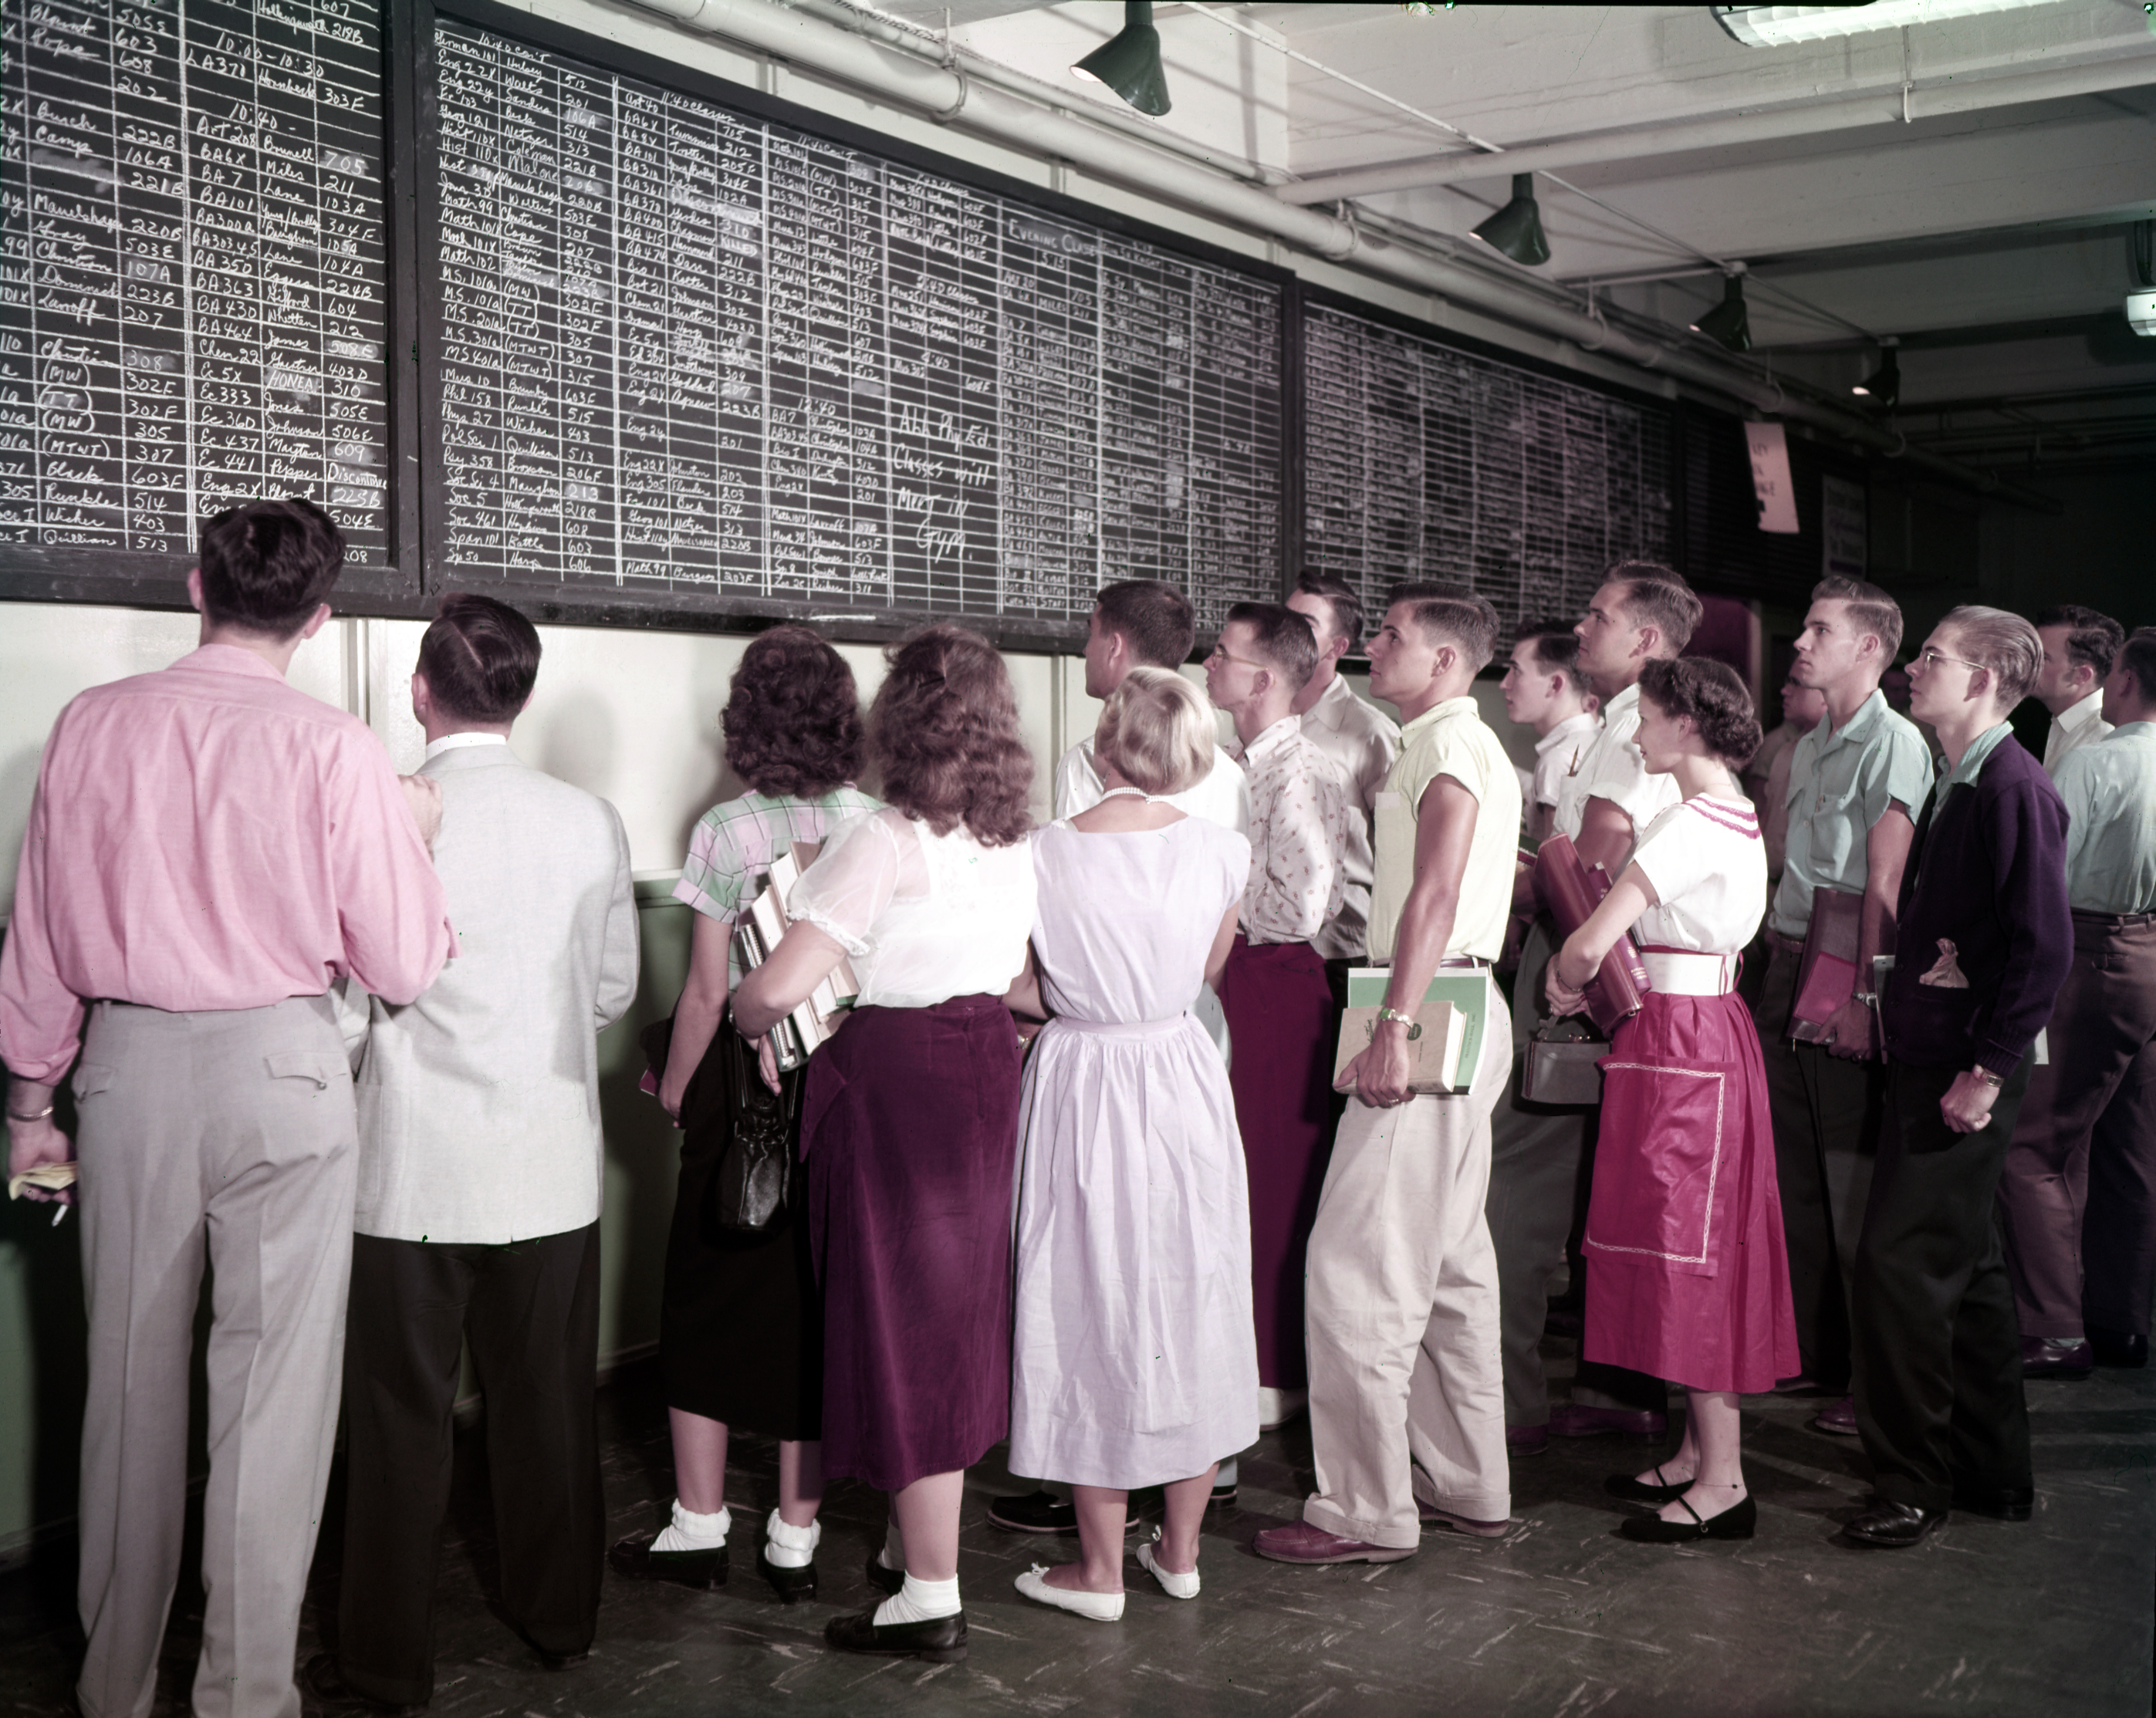 Photograph of students gathered to view the course board in Kell Hall, 1953